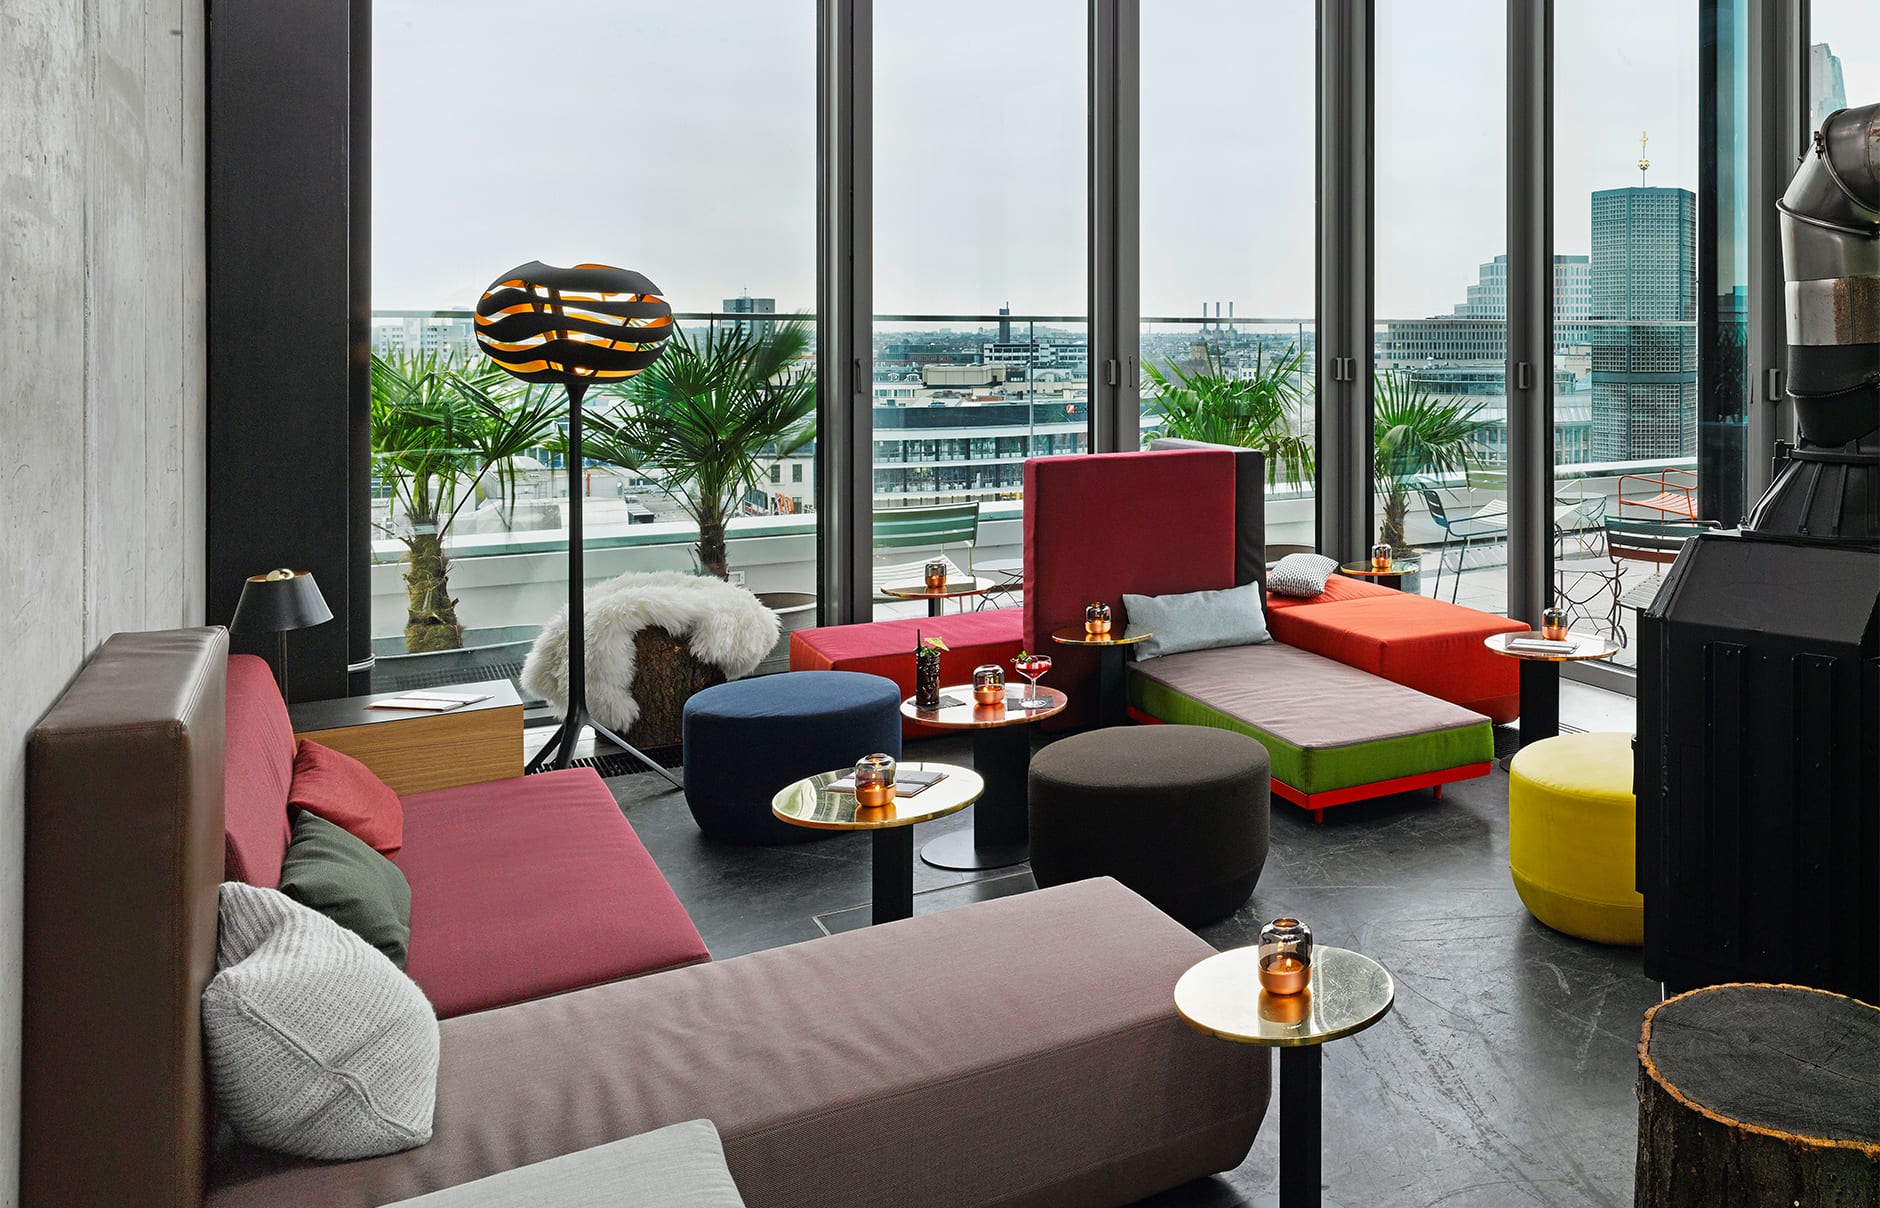 25hours Hotel Bikini Berlin, Germany. Hotel Review by TravelPlusStyle. Photo © 25hours Hotels 